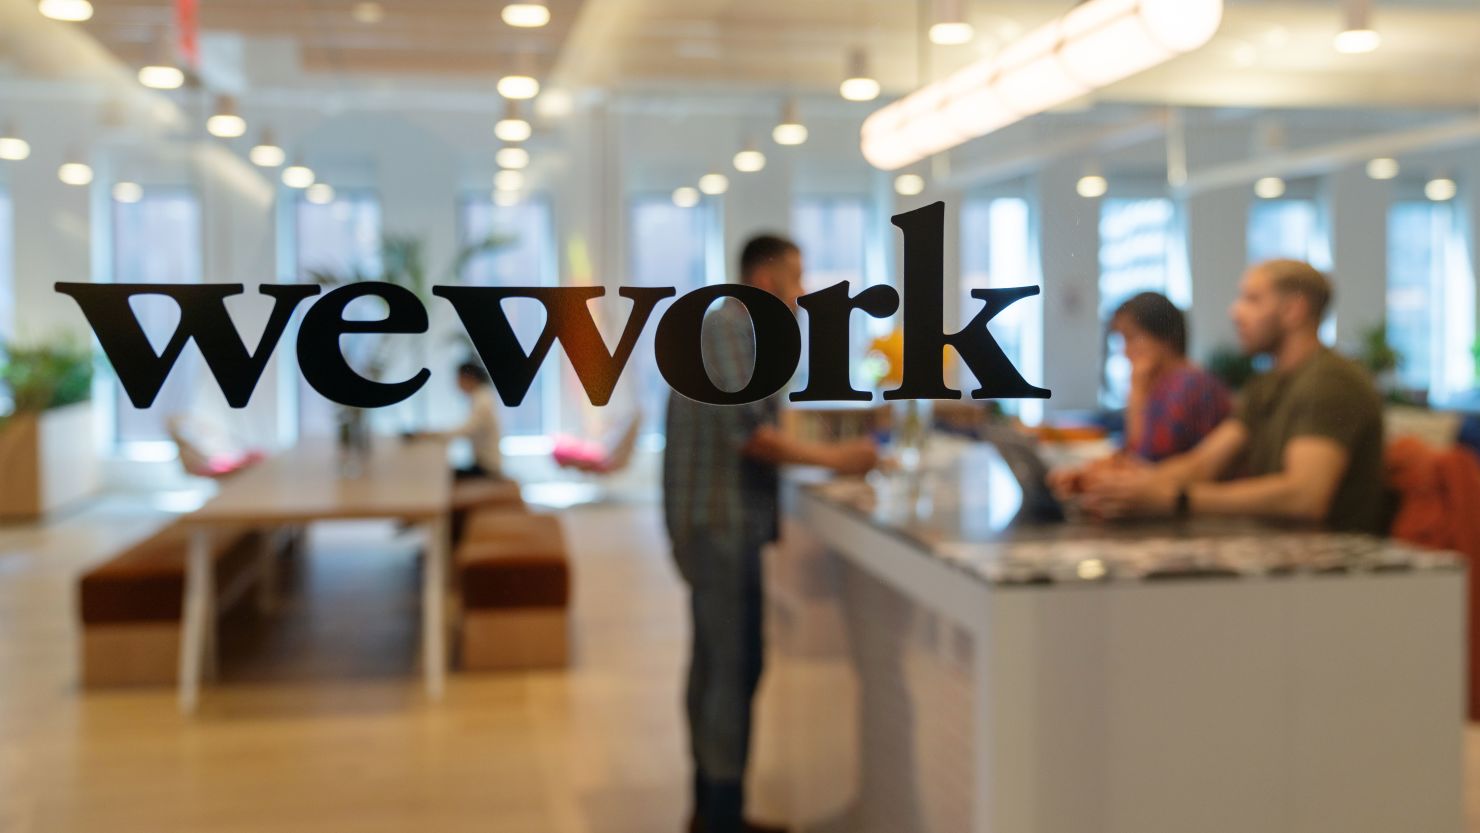 Signage is seen at the entrance of the WeWork Cos Inc. 85 Broad Street offices in the Manhattan borough of New York, U.S., on Wednesday, May 22, 2019.